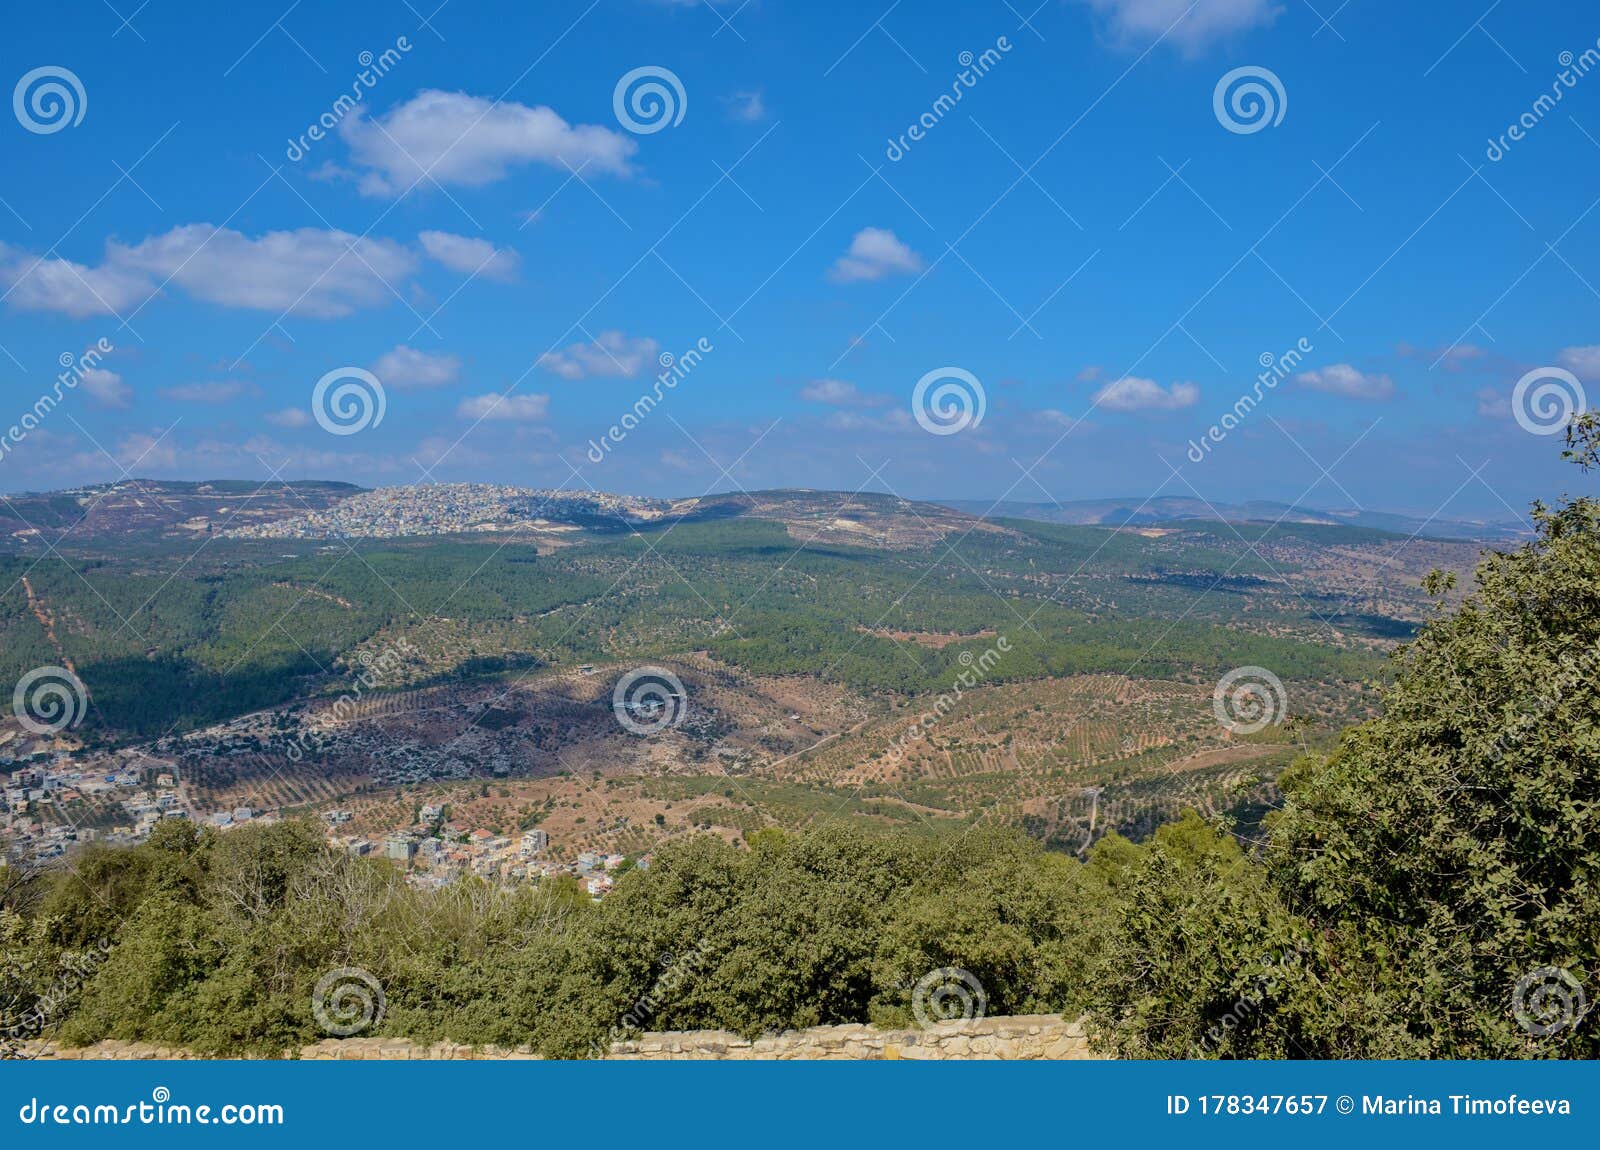 view from the biblical mount tabor to the valley, villages and mountains.